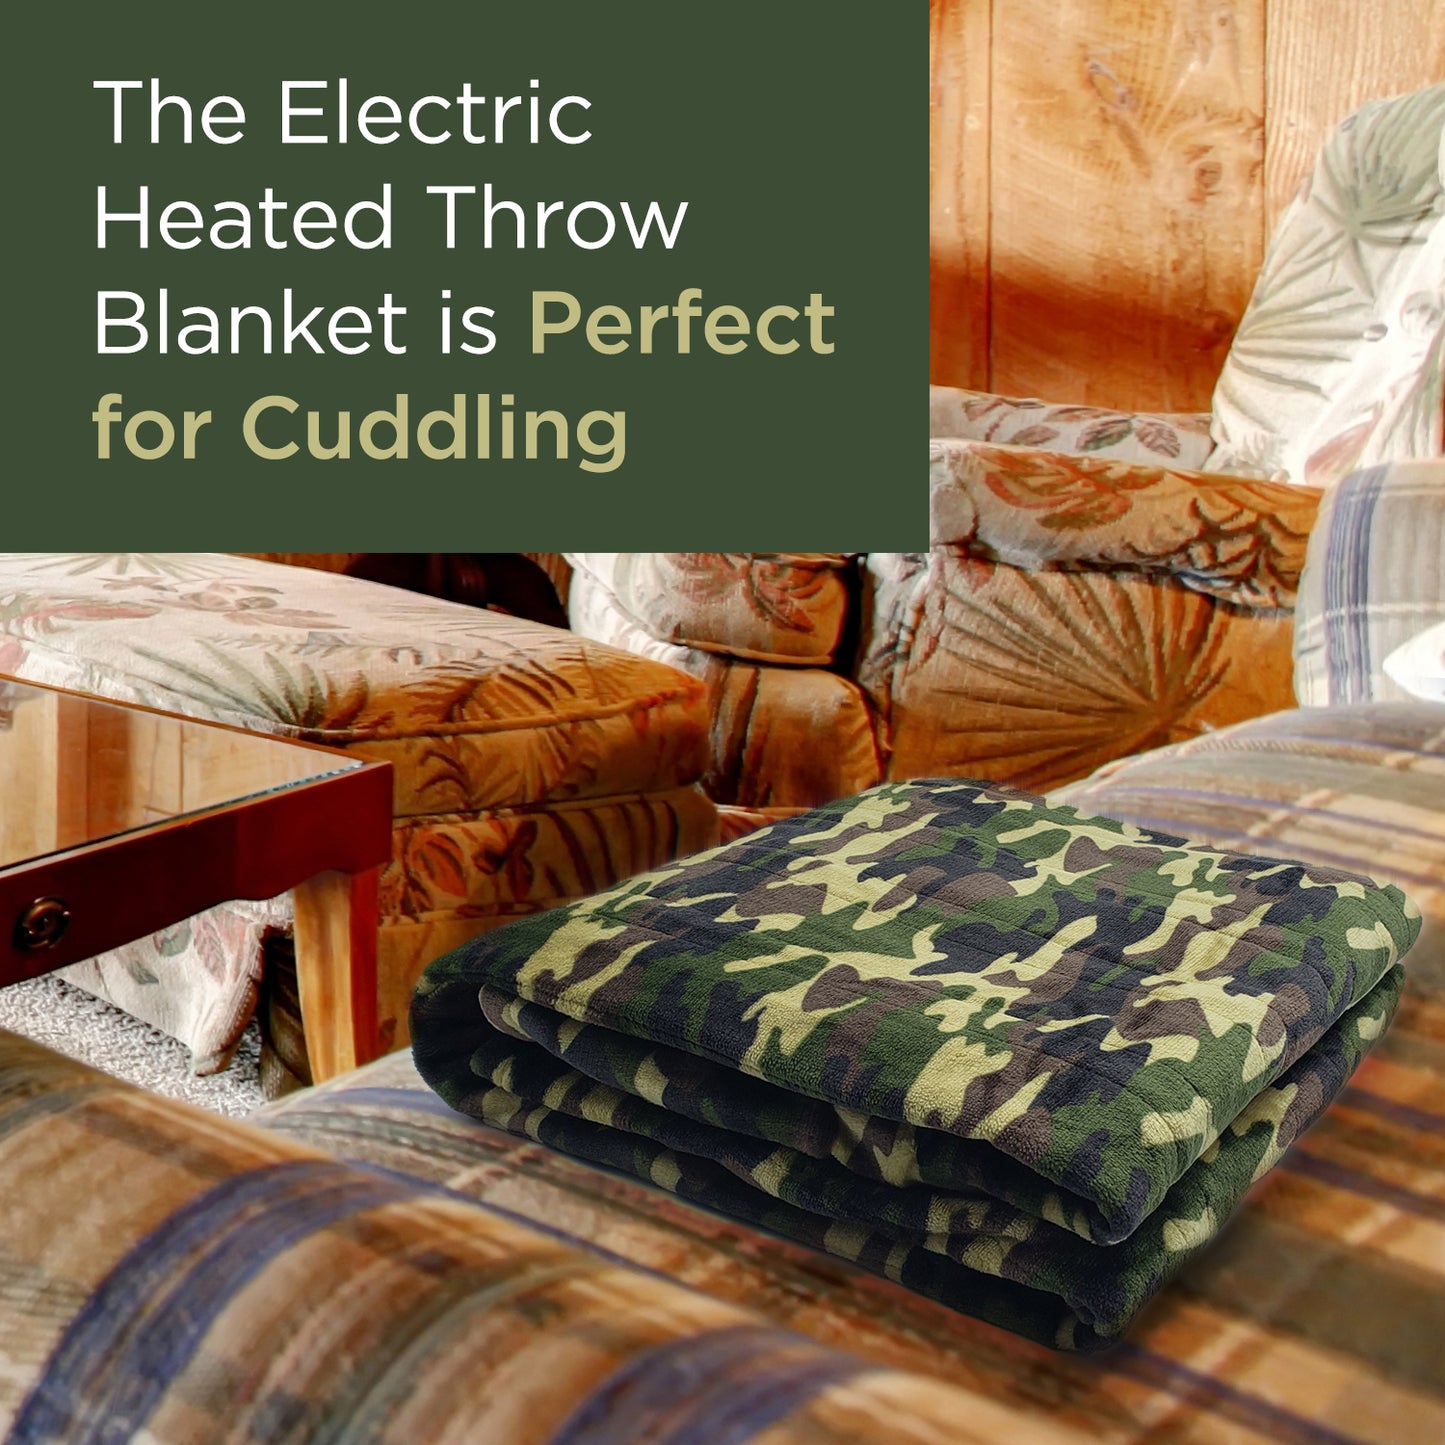 Dr Relief by SUNAID Electric Heated Throw Blanket Fleece with Controller, 4 Hours Auto Shut-Off, Fast Warming, Full-Body Comfort, Luxuriously Soft, Machine Washable, 50" x 60", Micromink for Cozy Couch or Bed (Camo)